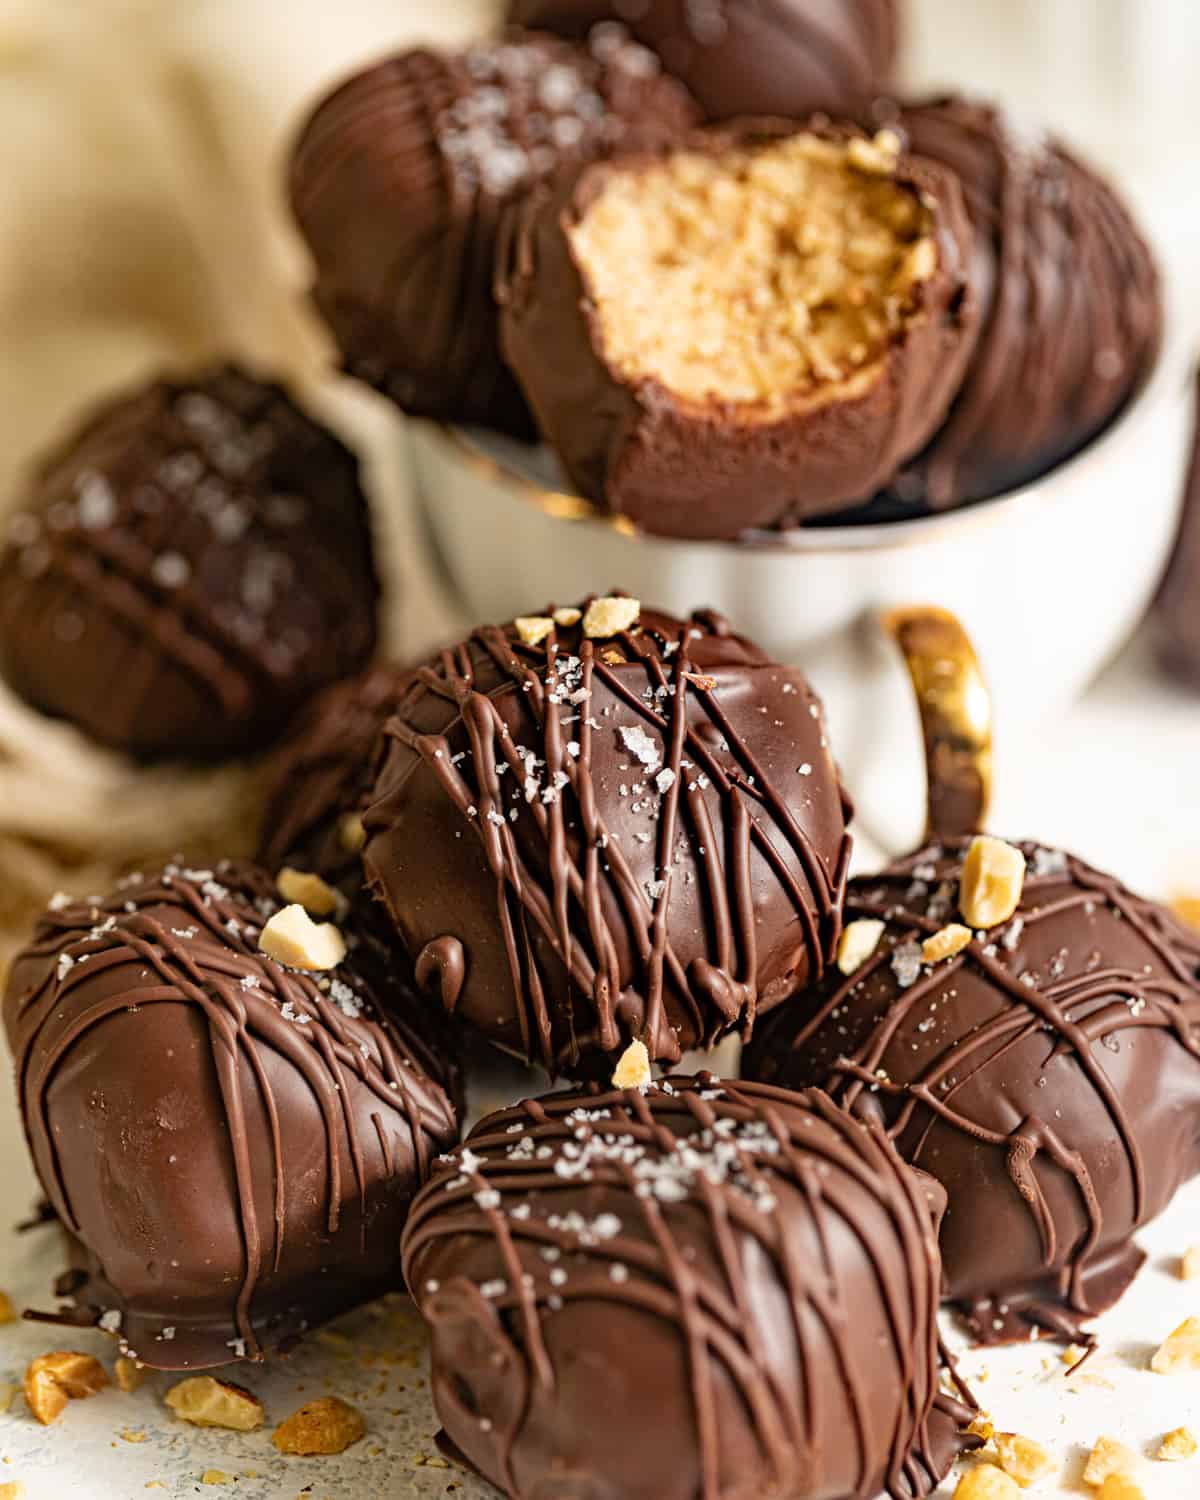 A pile of chocolate dipped peanut butter truffles.